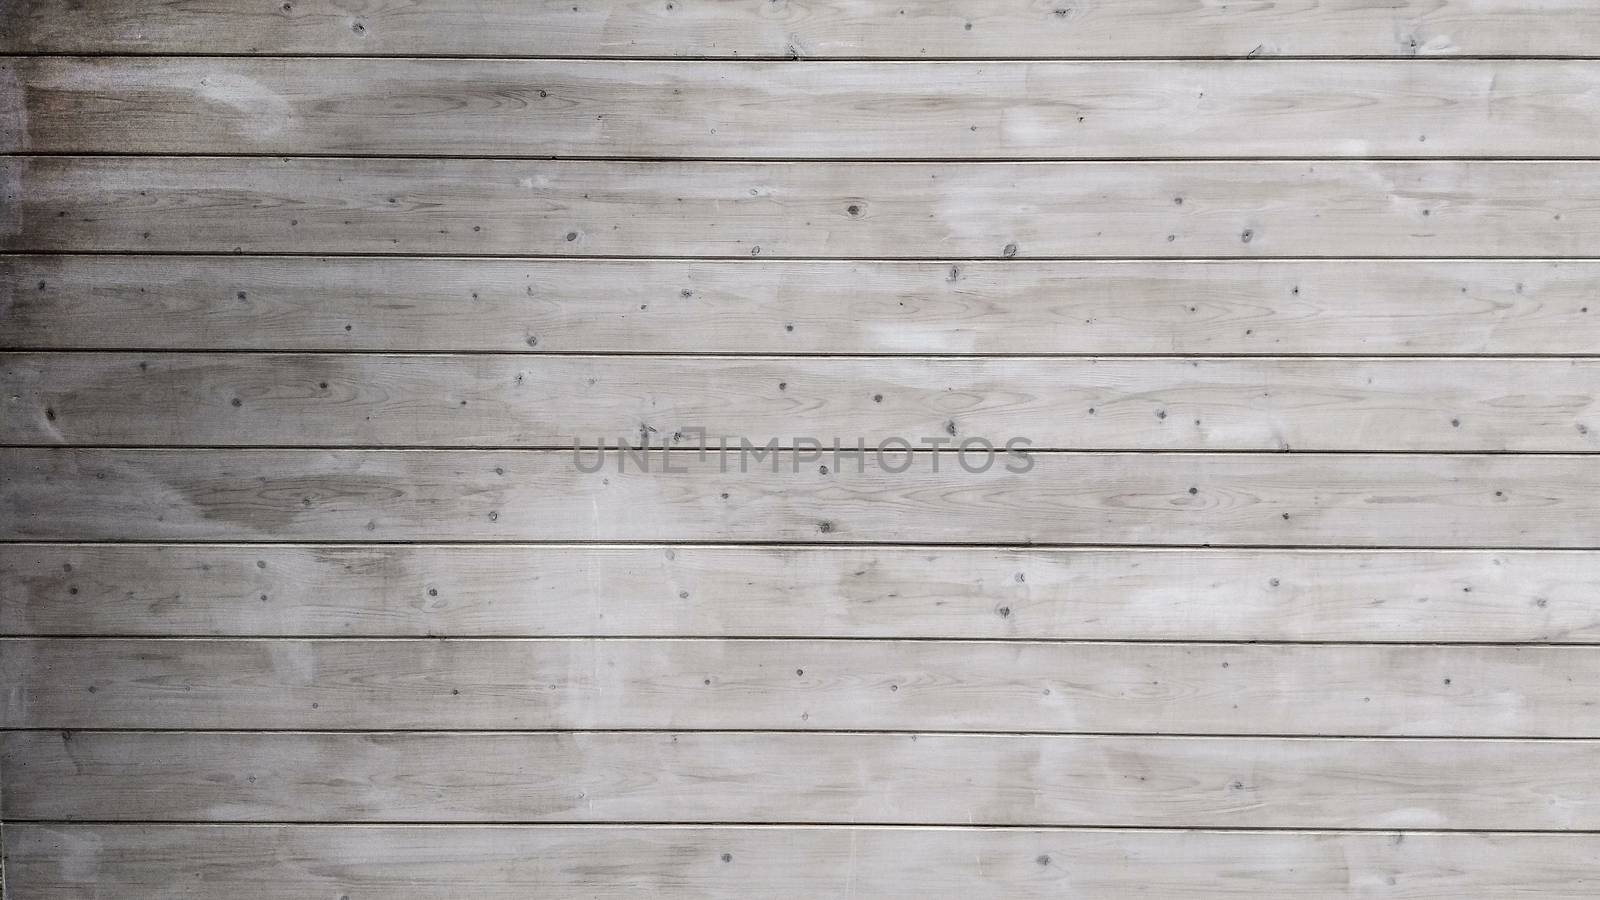 Shabby chic style wooden background composed by planks